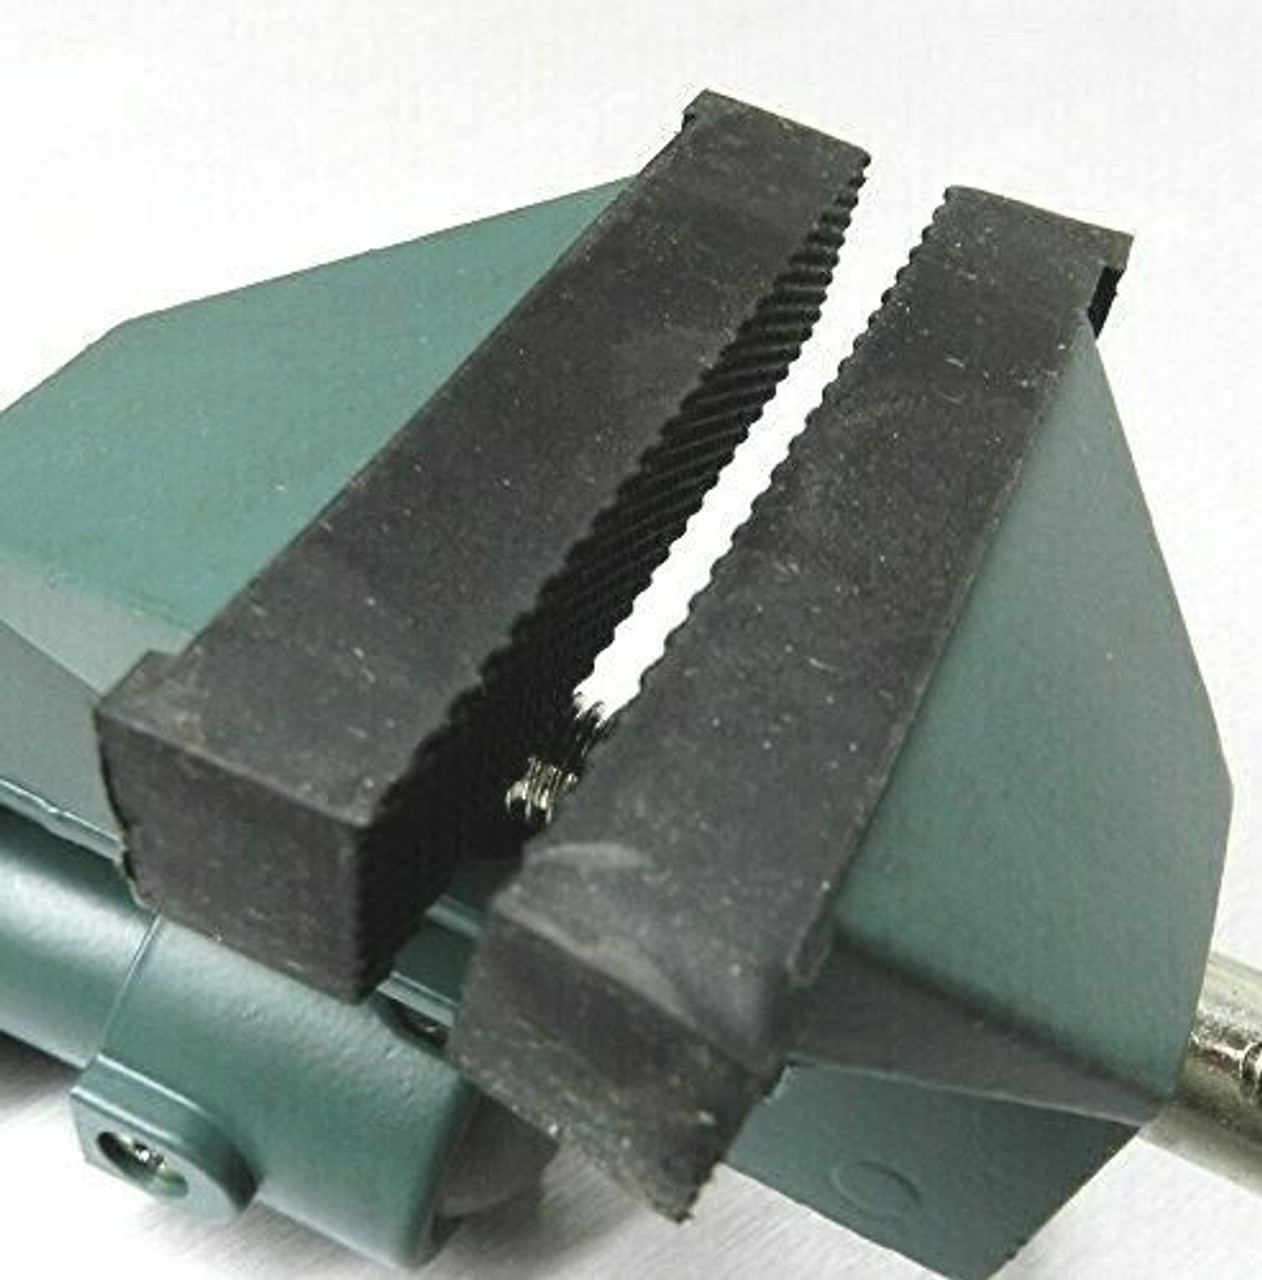 Rubber Jaws for Swivel Bench Vise Replacement Part for 3" Bench Vise Set of 2